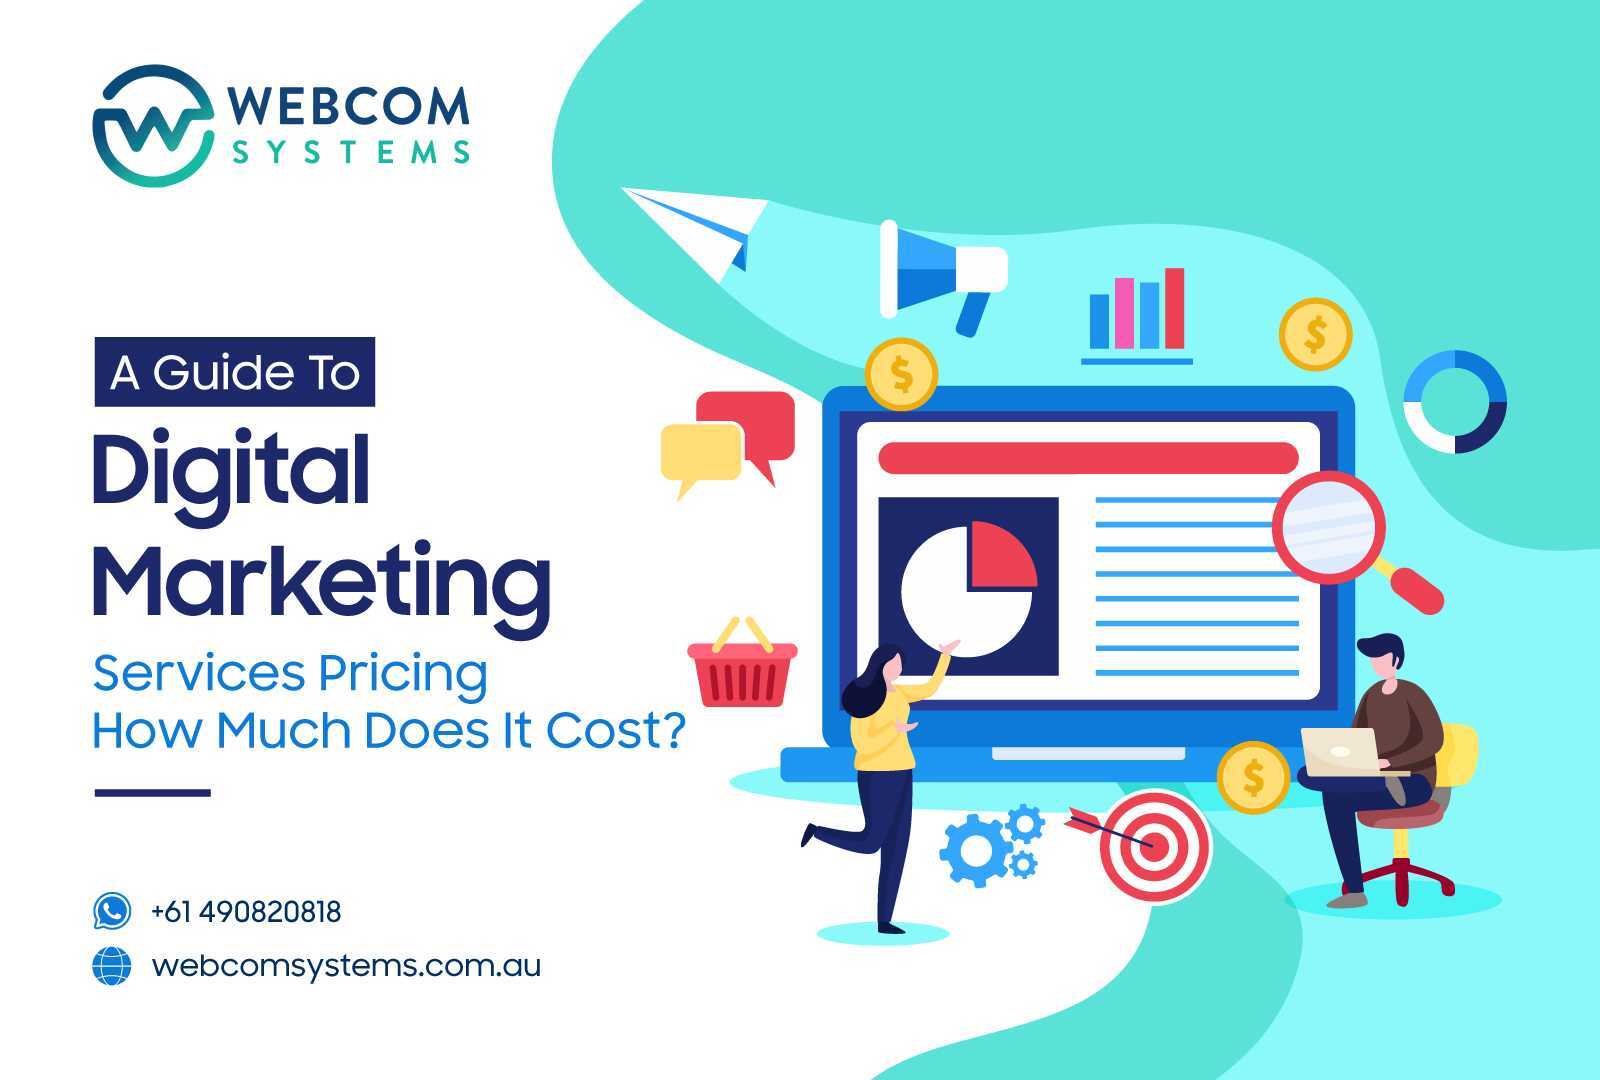 A Guide To Digital Marketing Services Pricing- How Much Does It Cost?